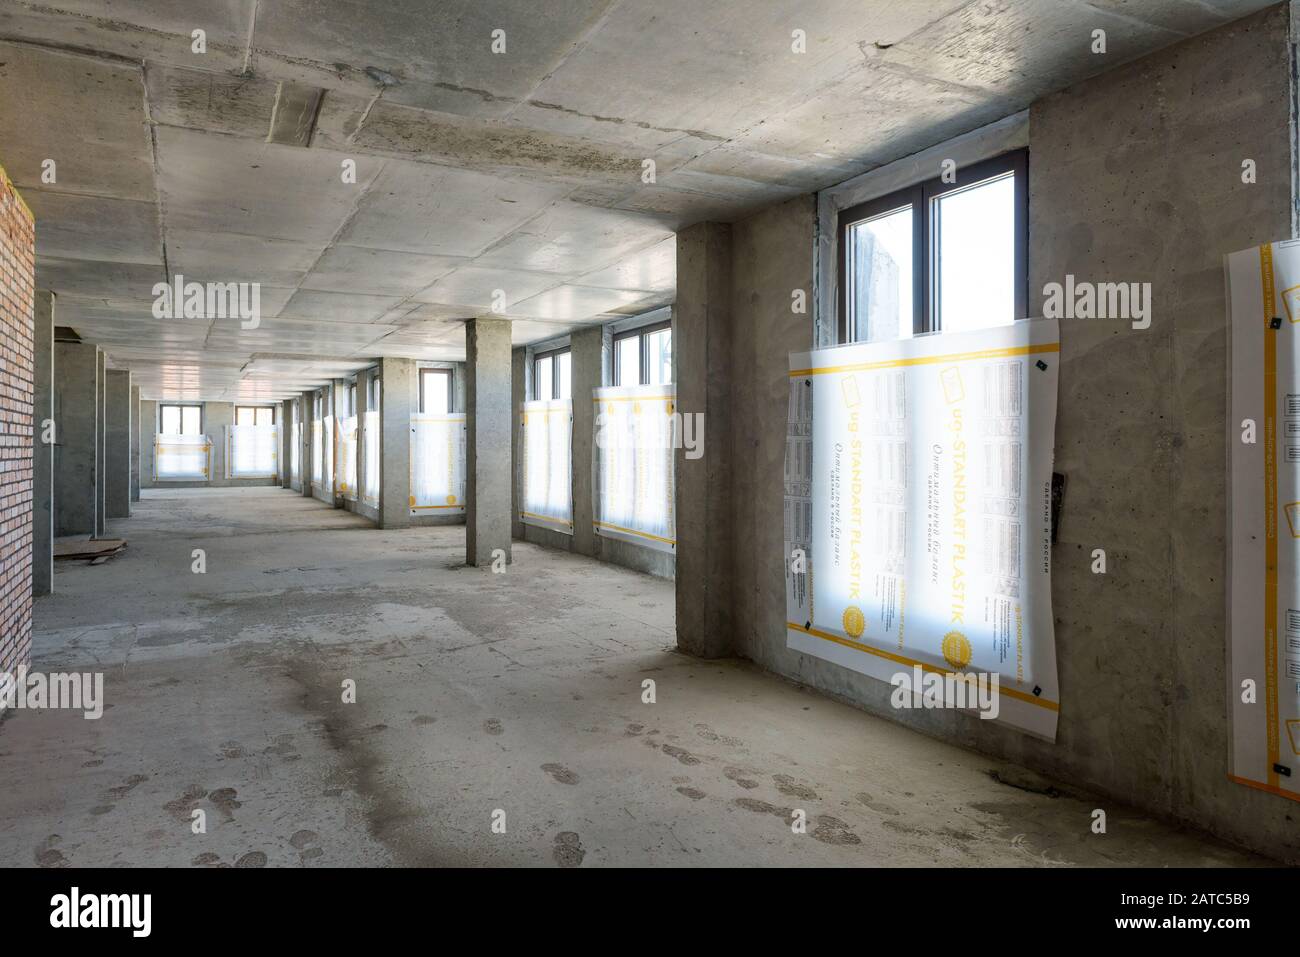 Moscow - Aug 10, 2017: Inside the structure under construction with concrete walls, ceiling and floor. Panoramic view of corridor of construction site Stock Photo